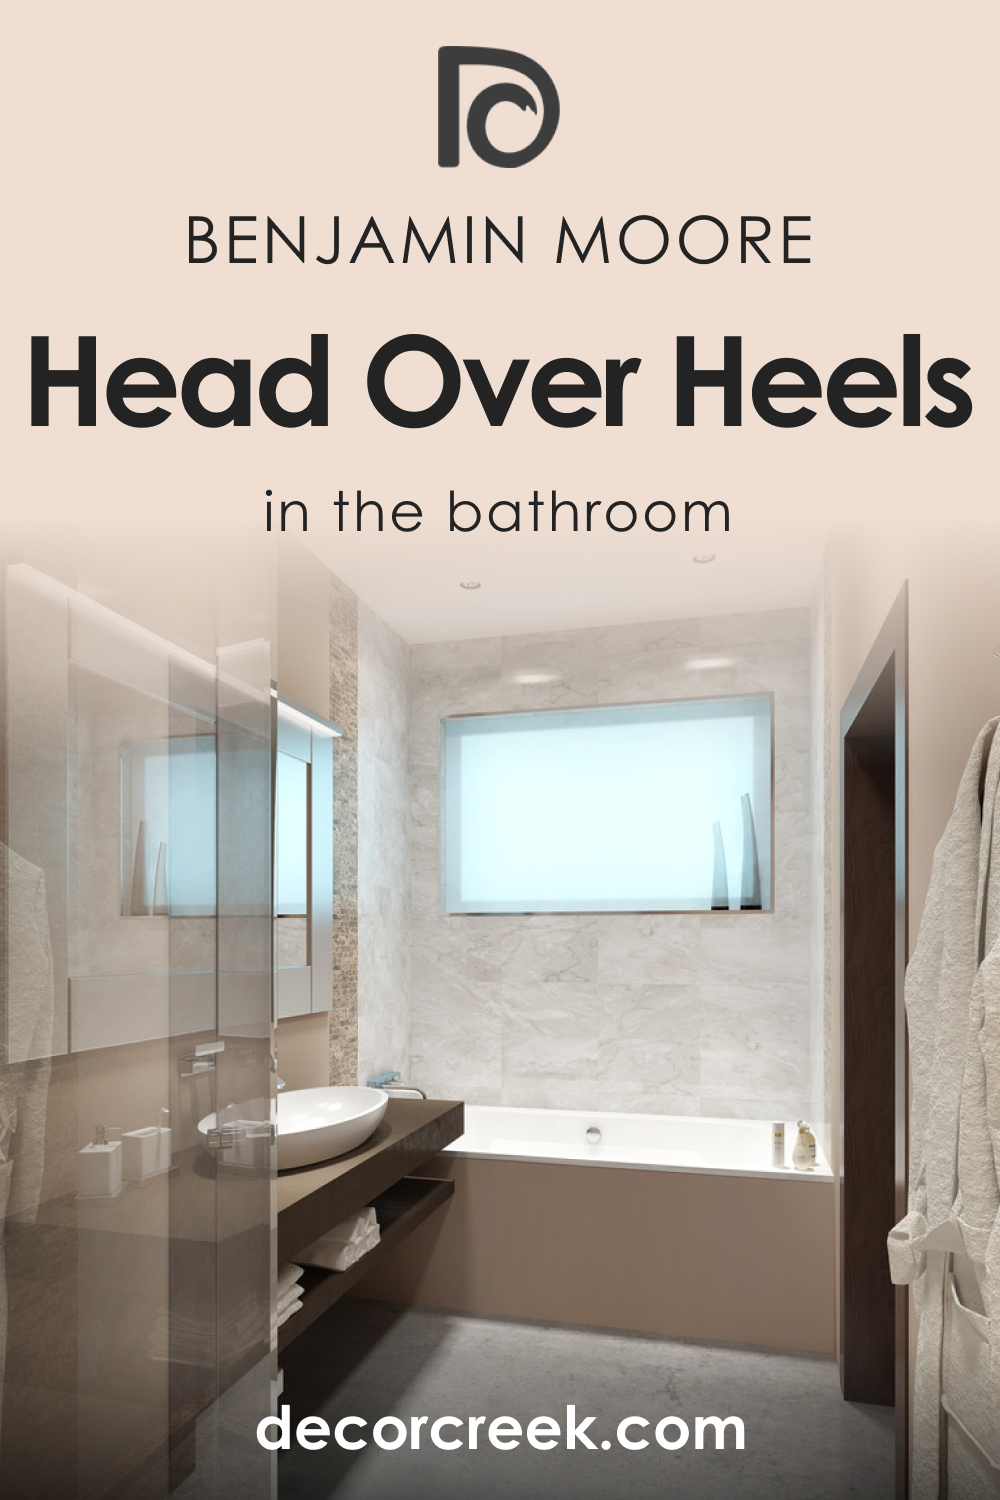 How to Use Head Over Heels AF-250 in the Bathroom?